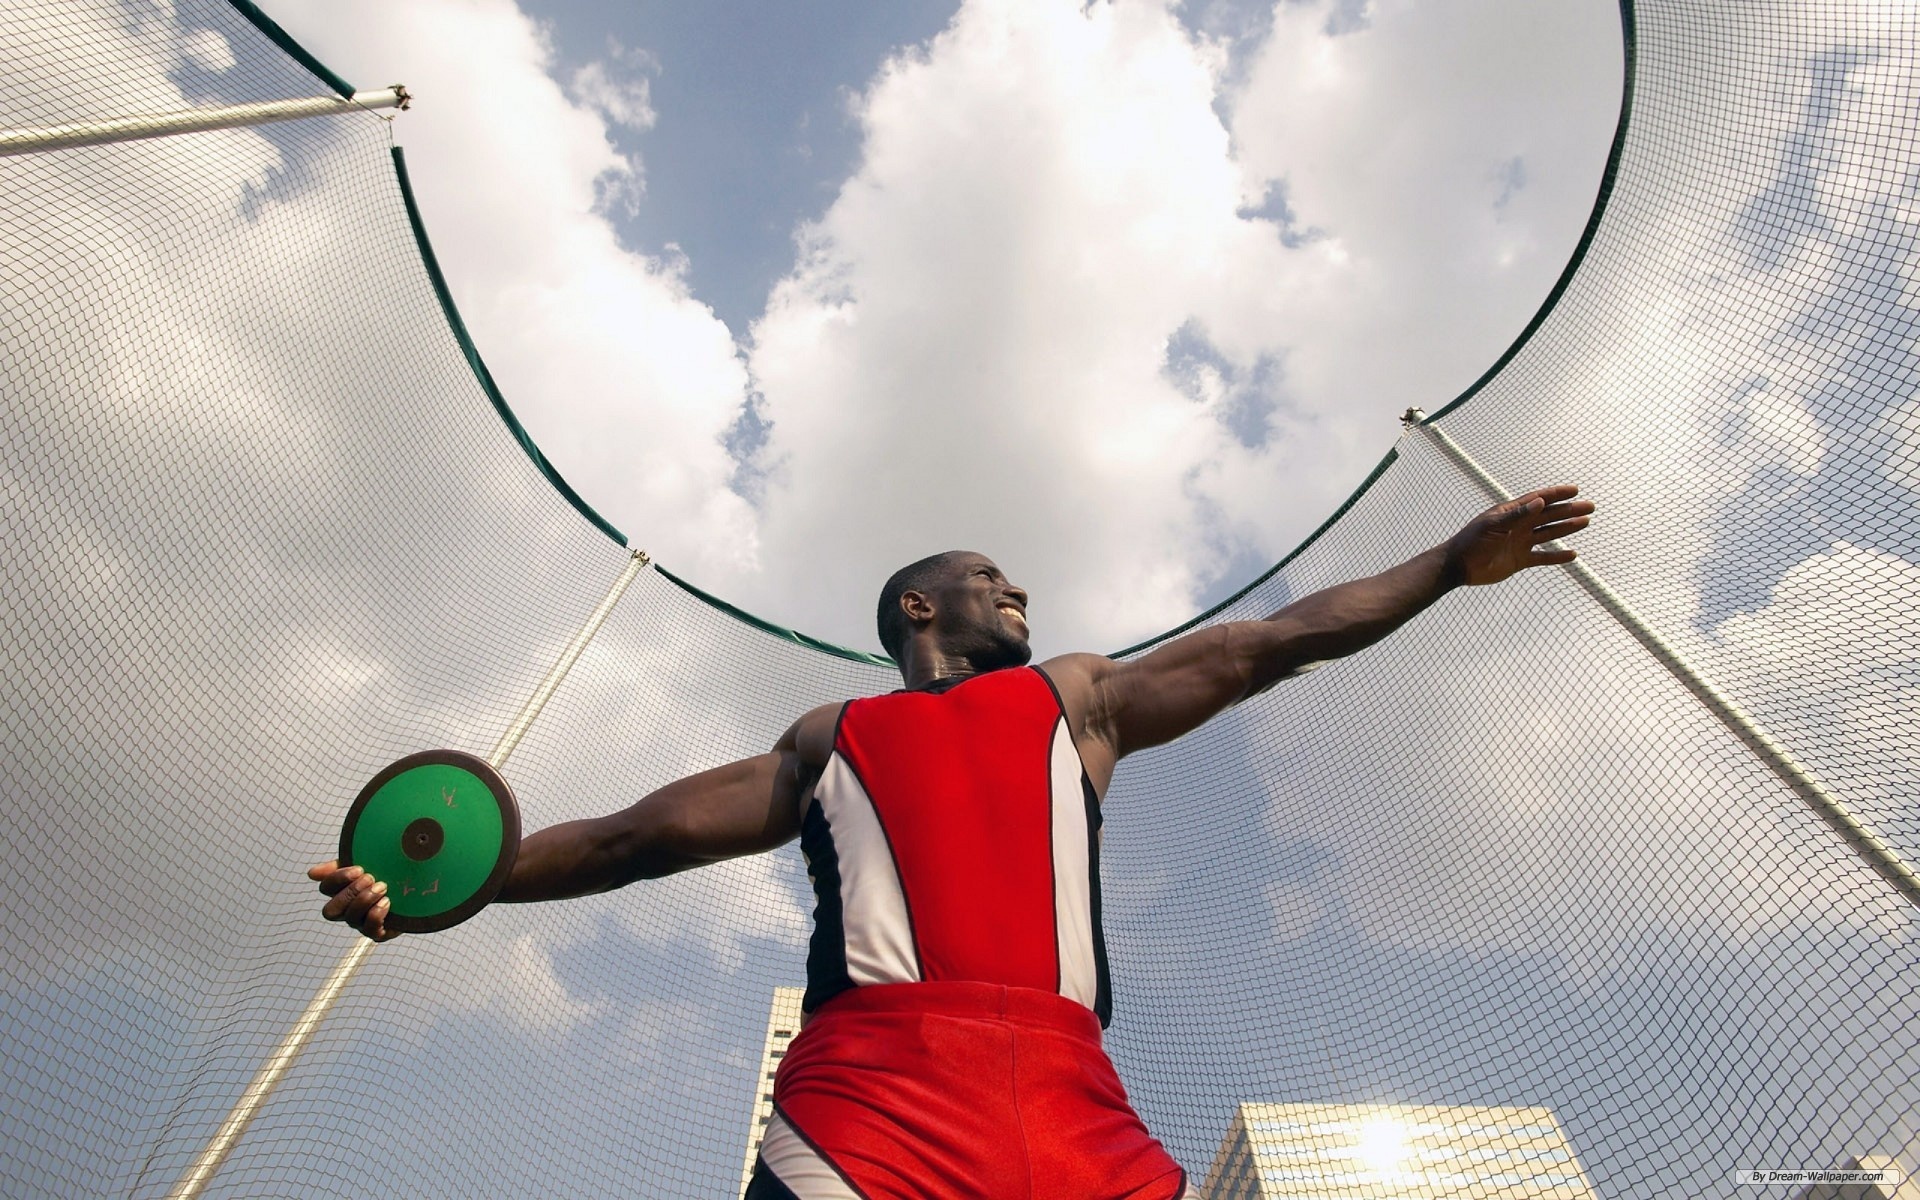 Discus Throw: Athletics, An event in track and field athletics in which an athlete throws a heavy disk. 1920x1200 HD Wallpaper.